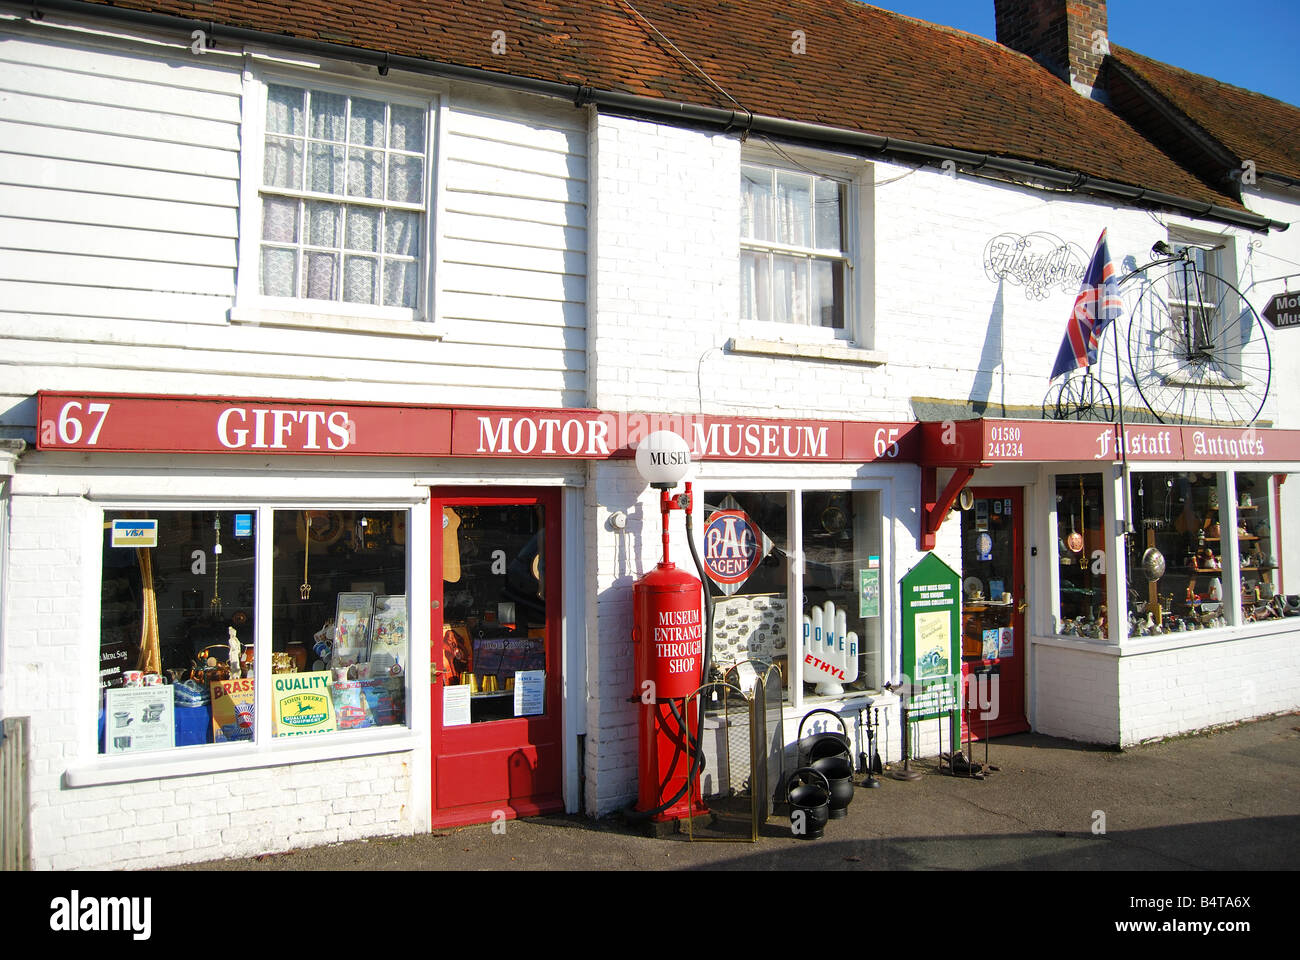 C.M. Booth Collection of Historic Vehicles, Falstaff Antiques, High Street, Rolvenden, Kent, United Kingdom Stock Photo